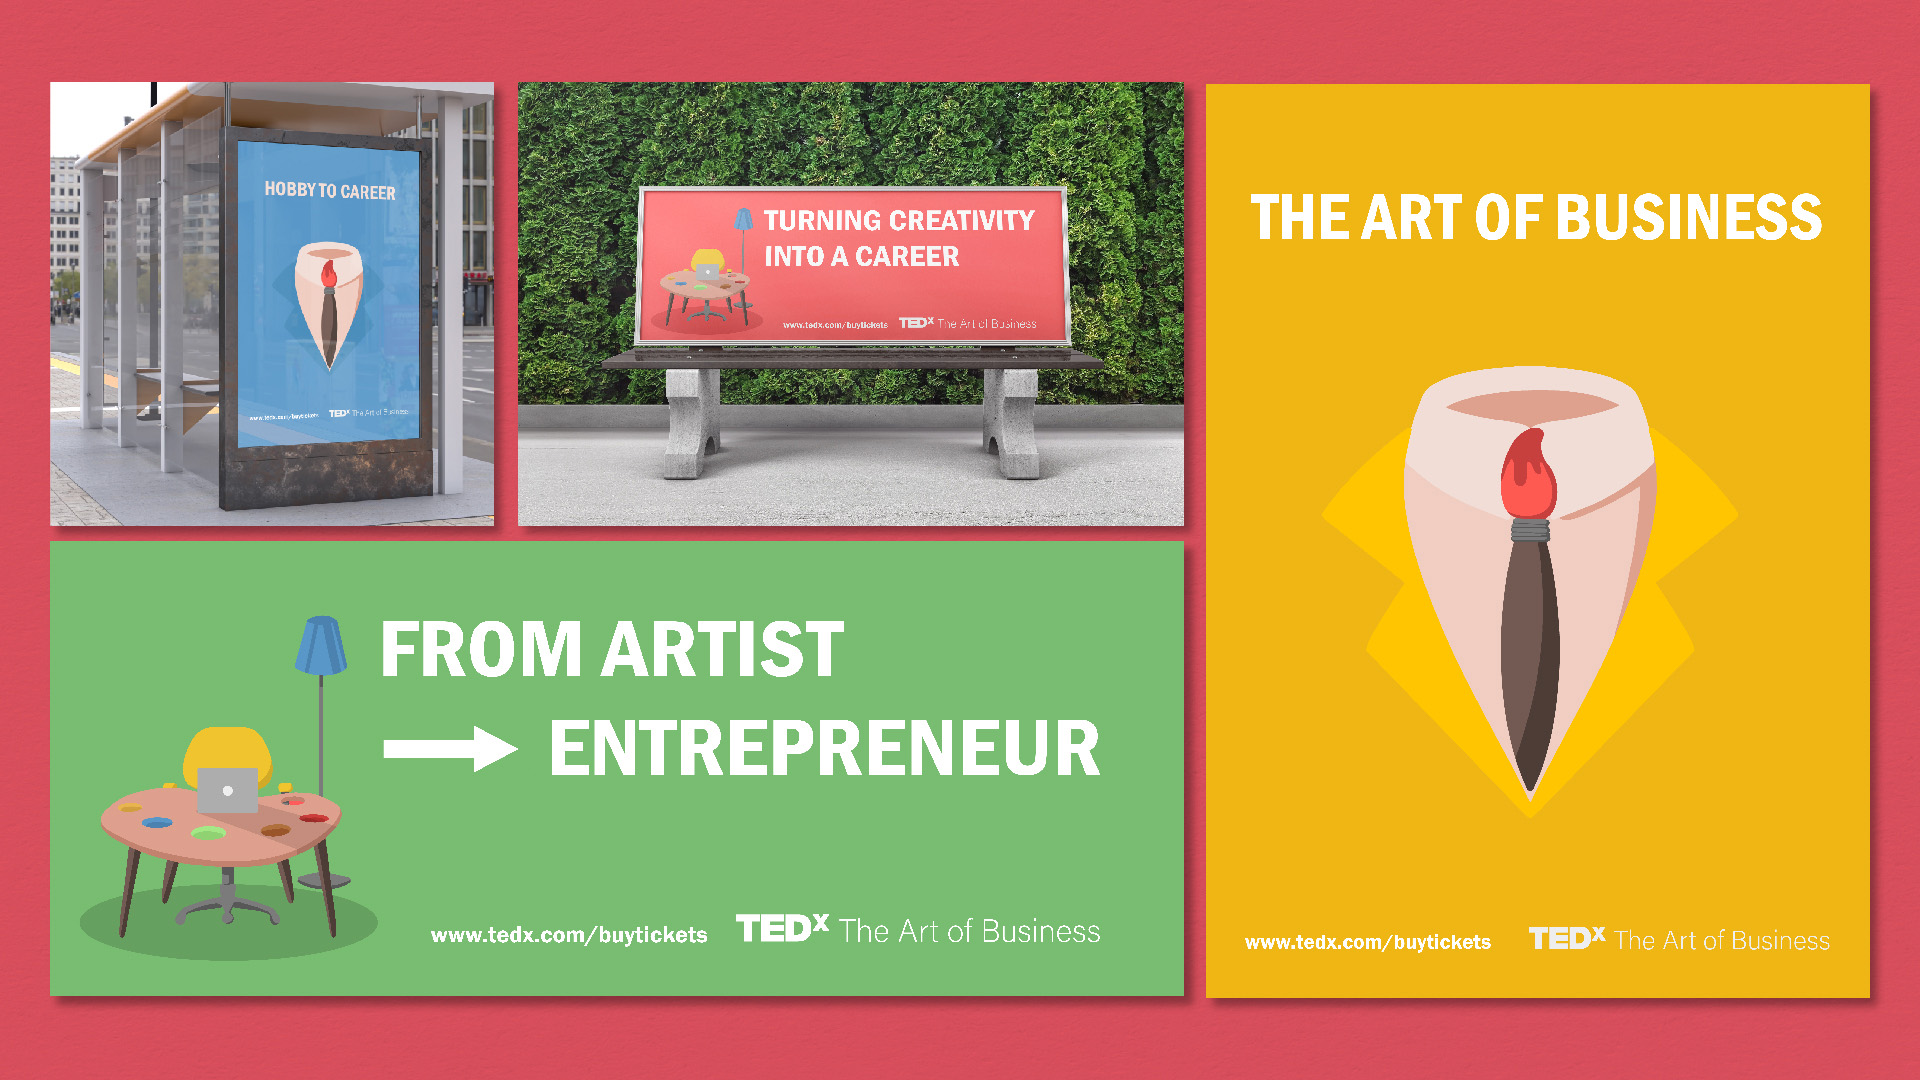 "TEDx: The Art of Business." / "TEDx: The Art of Business." Bus Stop Ads 32x40 inches & Bench Ads 40x14 inches, print 2021. Ad campaign for The Art of Business: how artists can turn their creativity into a career and why they should. 